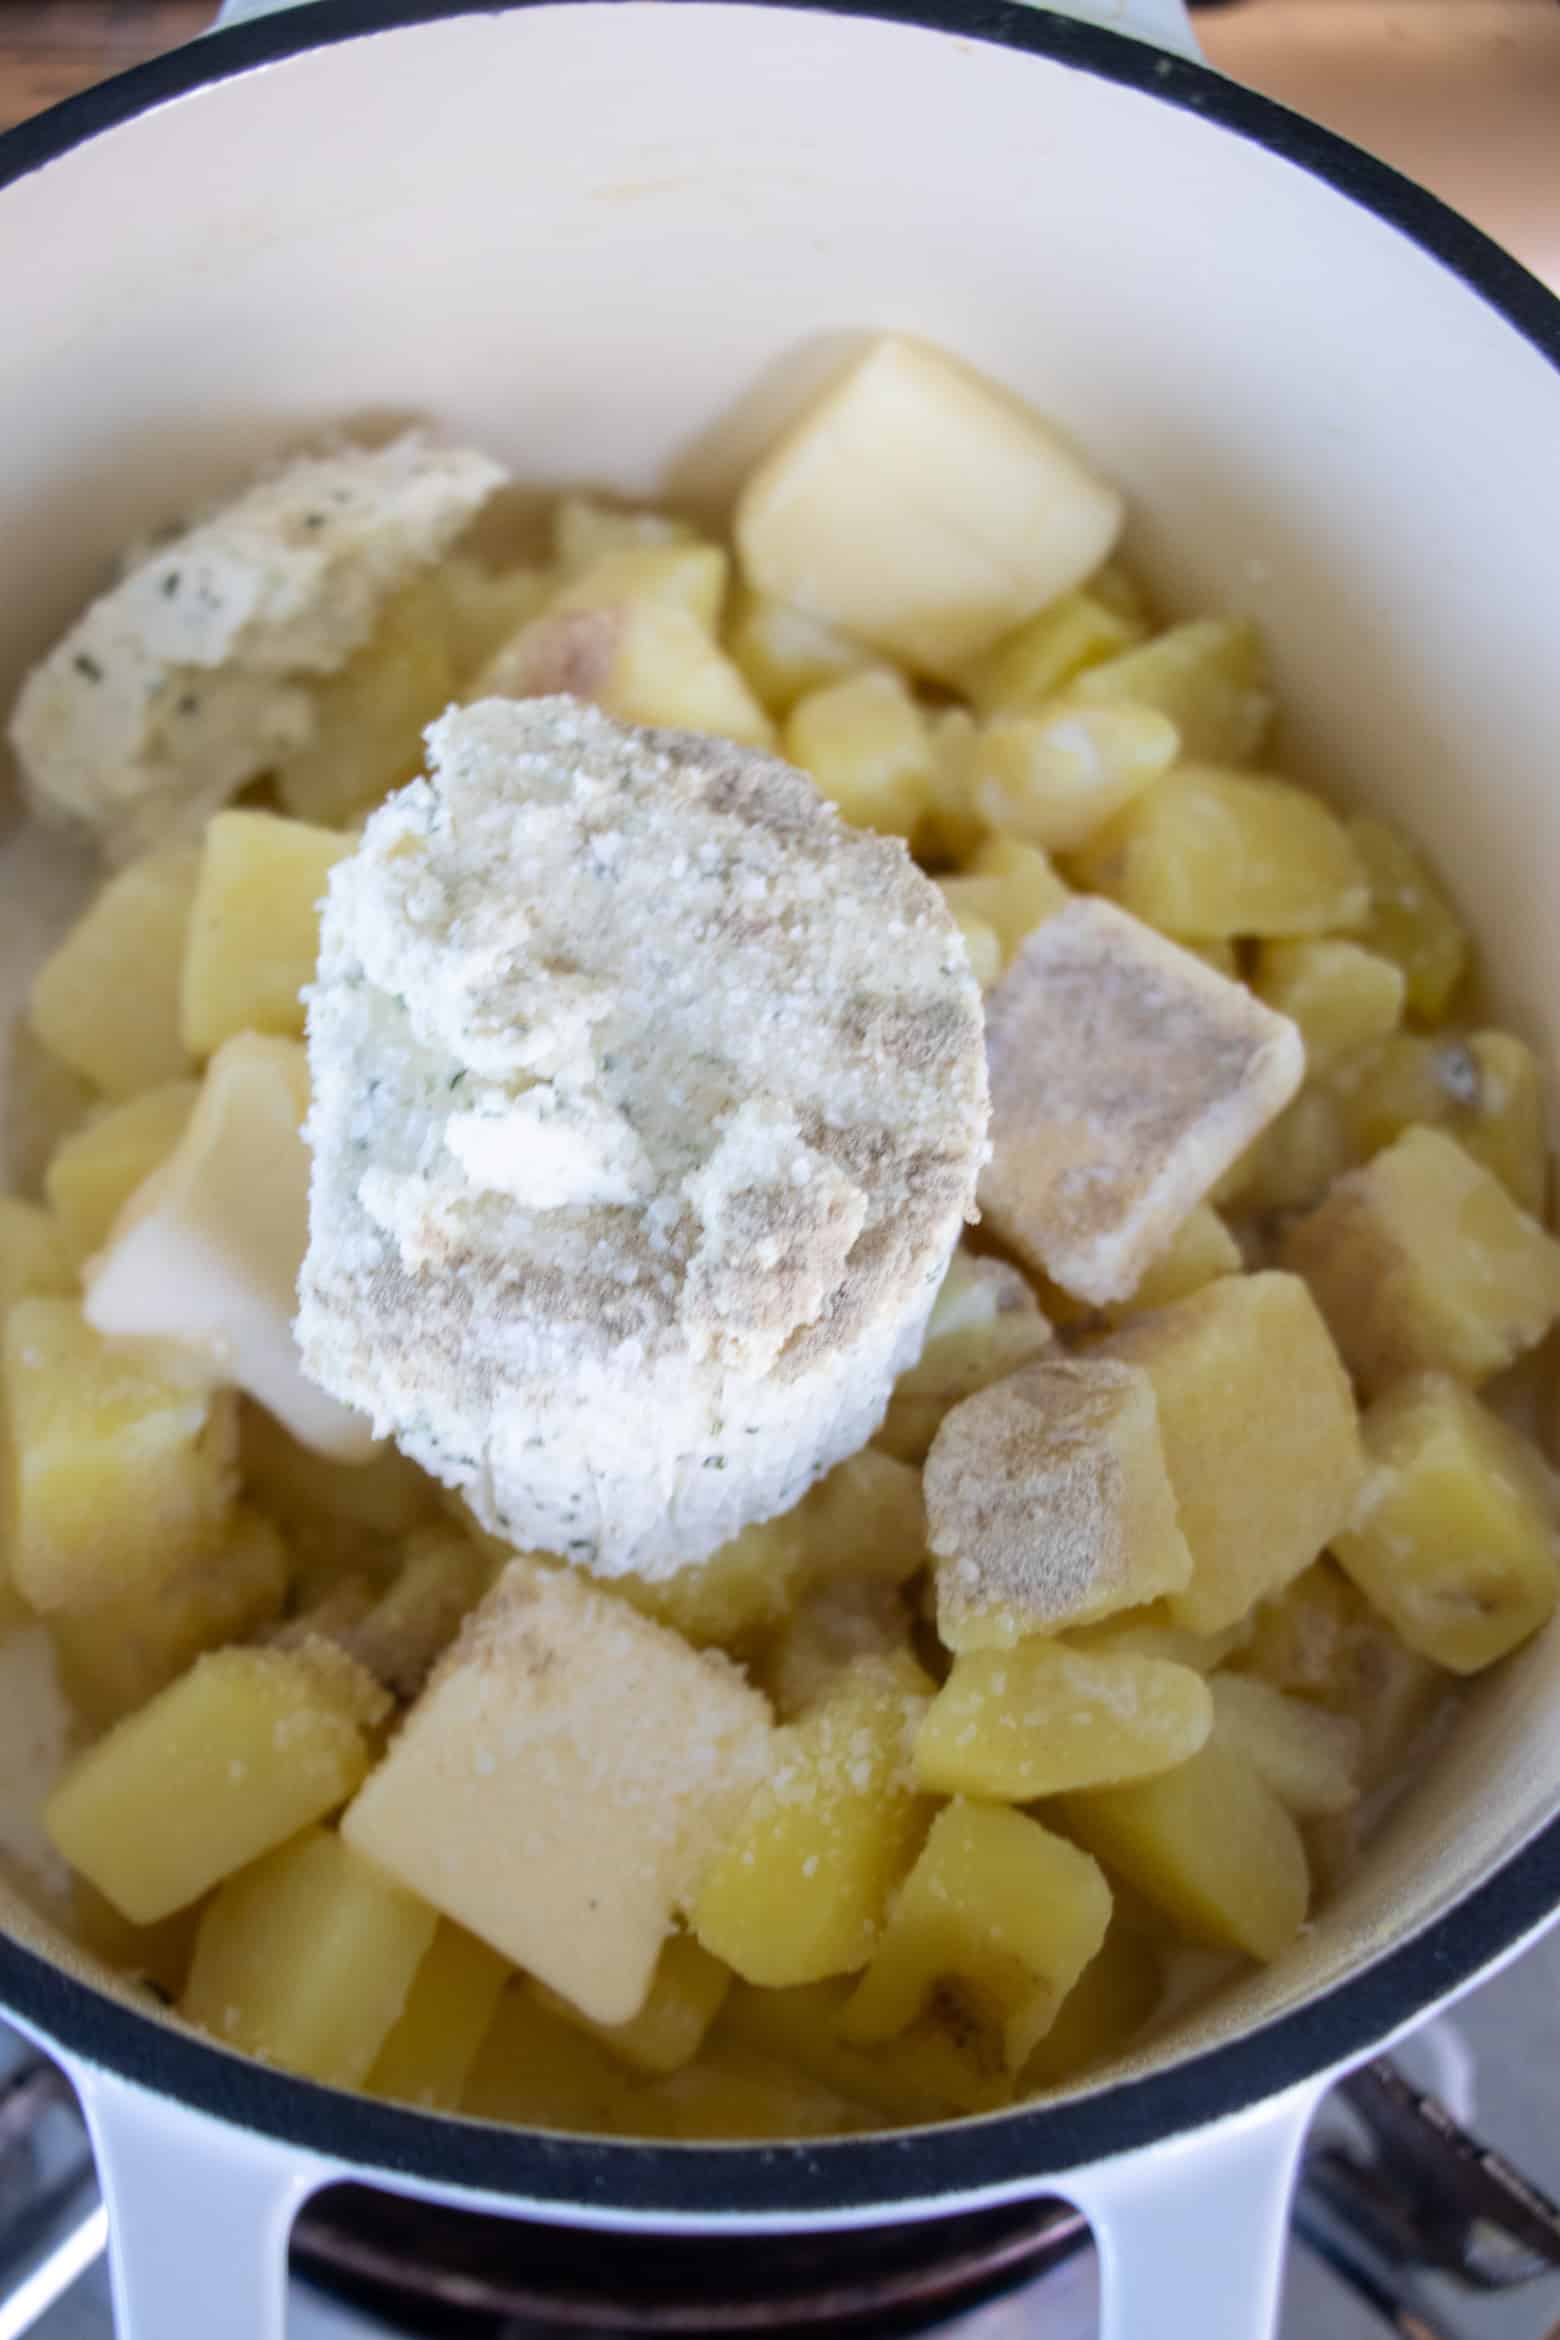 boursin cheese and seasonings being added to potatoes in pot